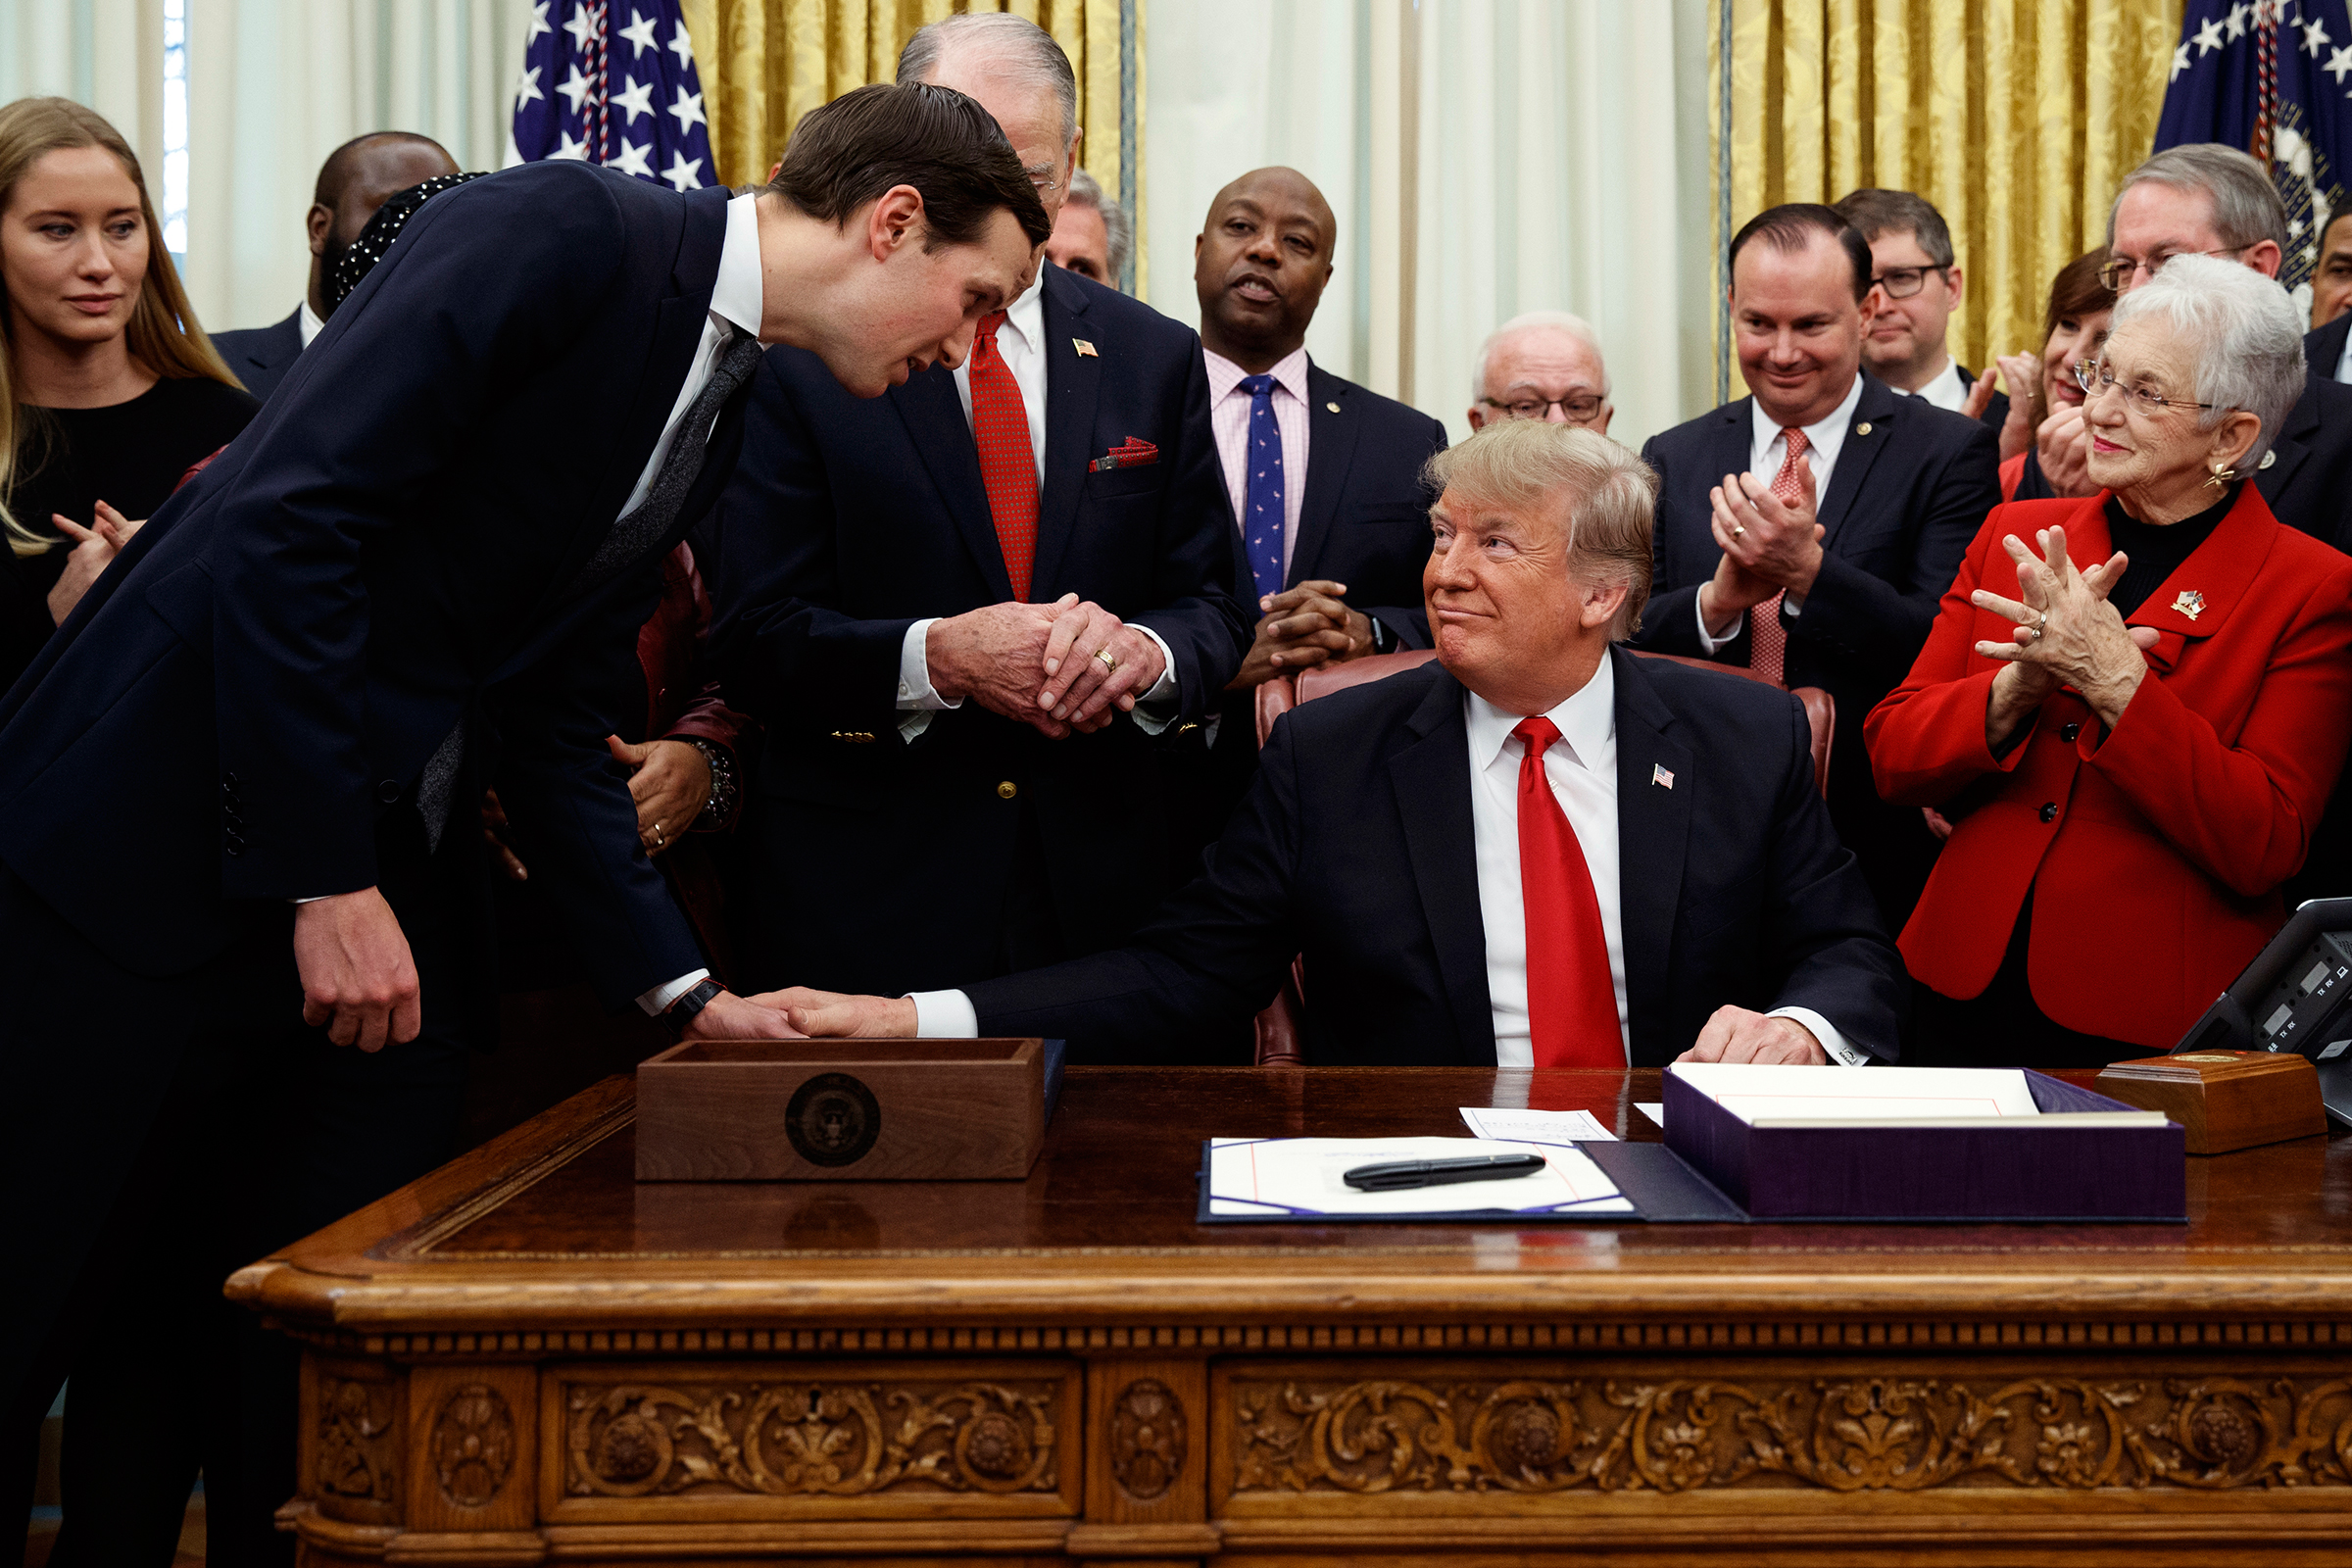 White House senior adviser Jared Kushner talks with President Donald Trump during a signing ceremony for criminal justice reform legislation in the Oval Office of the White House, Dec. 21, 2018.